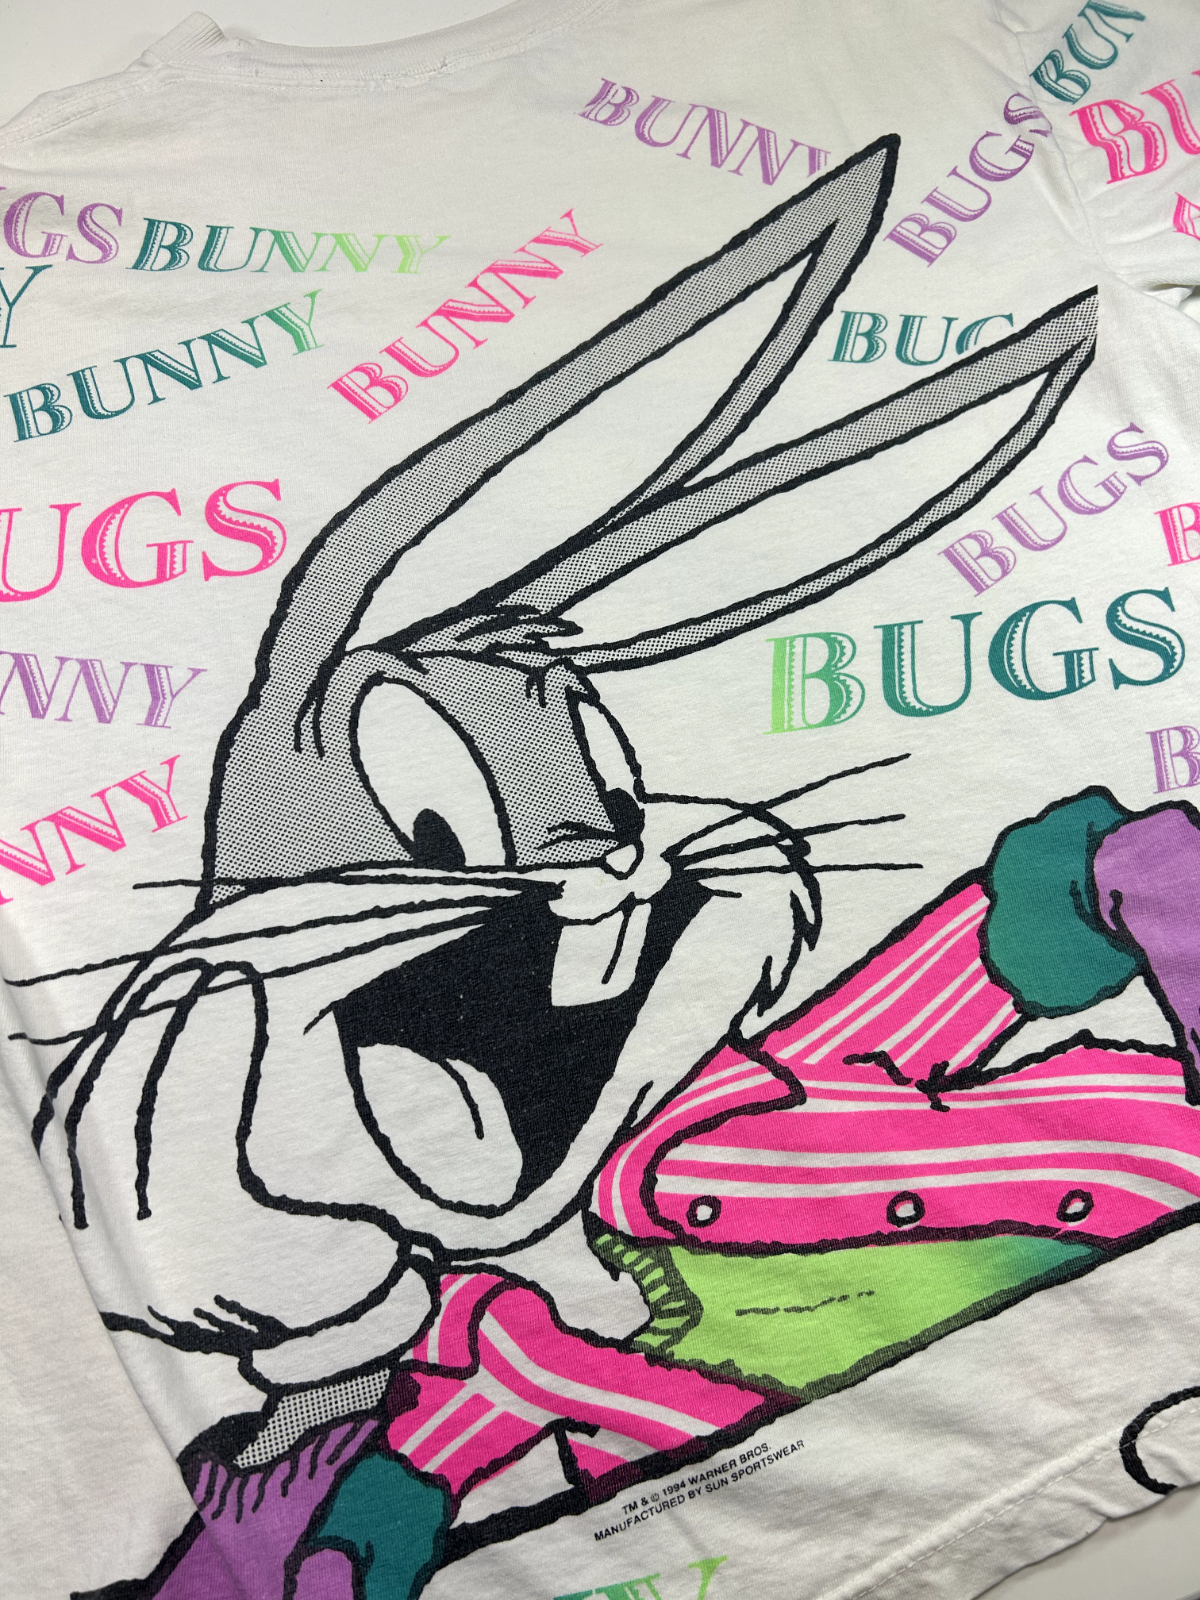 Vintage 1994 Bugs Bunny Looney Tune Cartoon AOP Graphic T-Shirt Size Large 90s